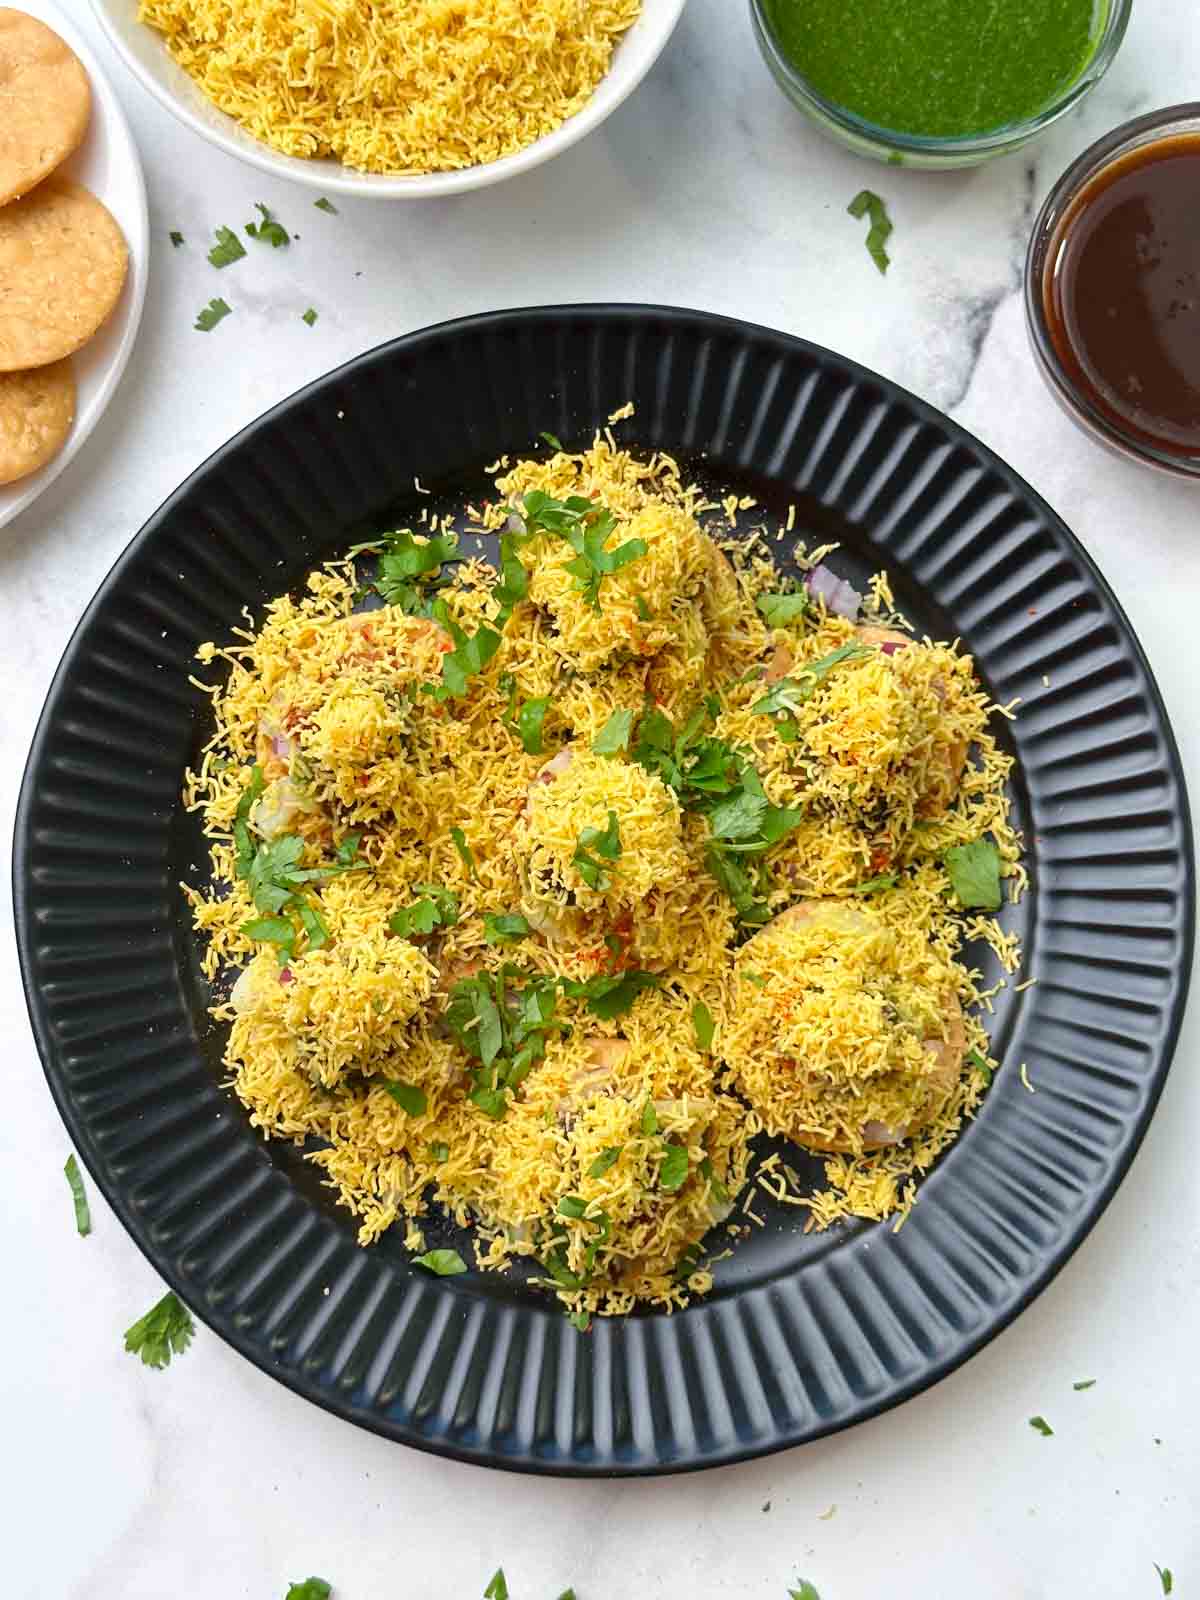 sev puri chaat served on a plate with sev and chutneys on the side